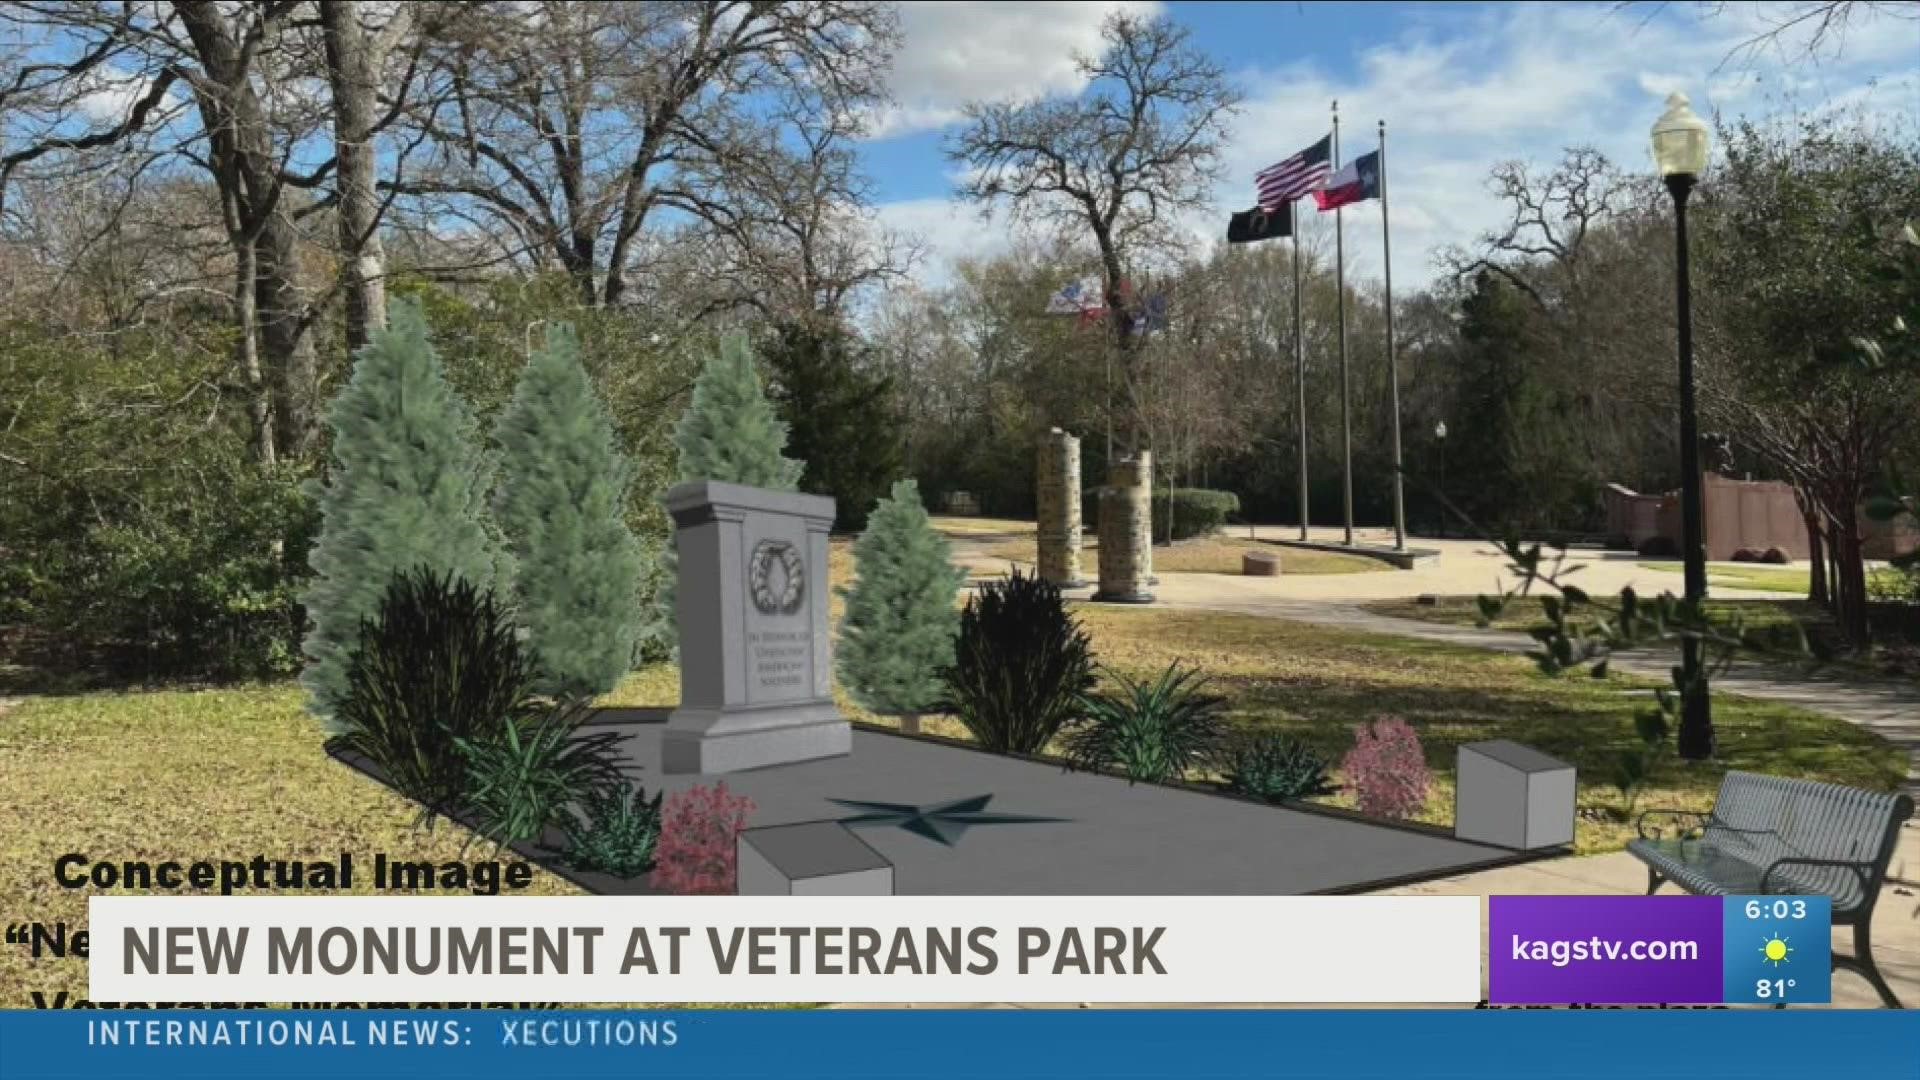 A standing granite monument symbolizing the Tomb of the Unknown Soldier will be made into a focal point in the Never Forget Garden Memorial at Veterans Park.